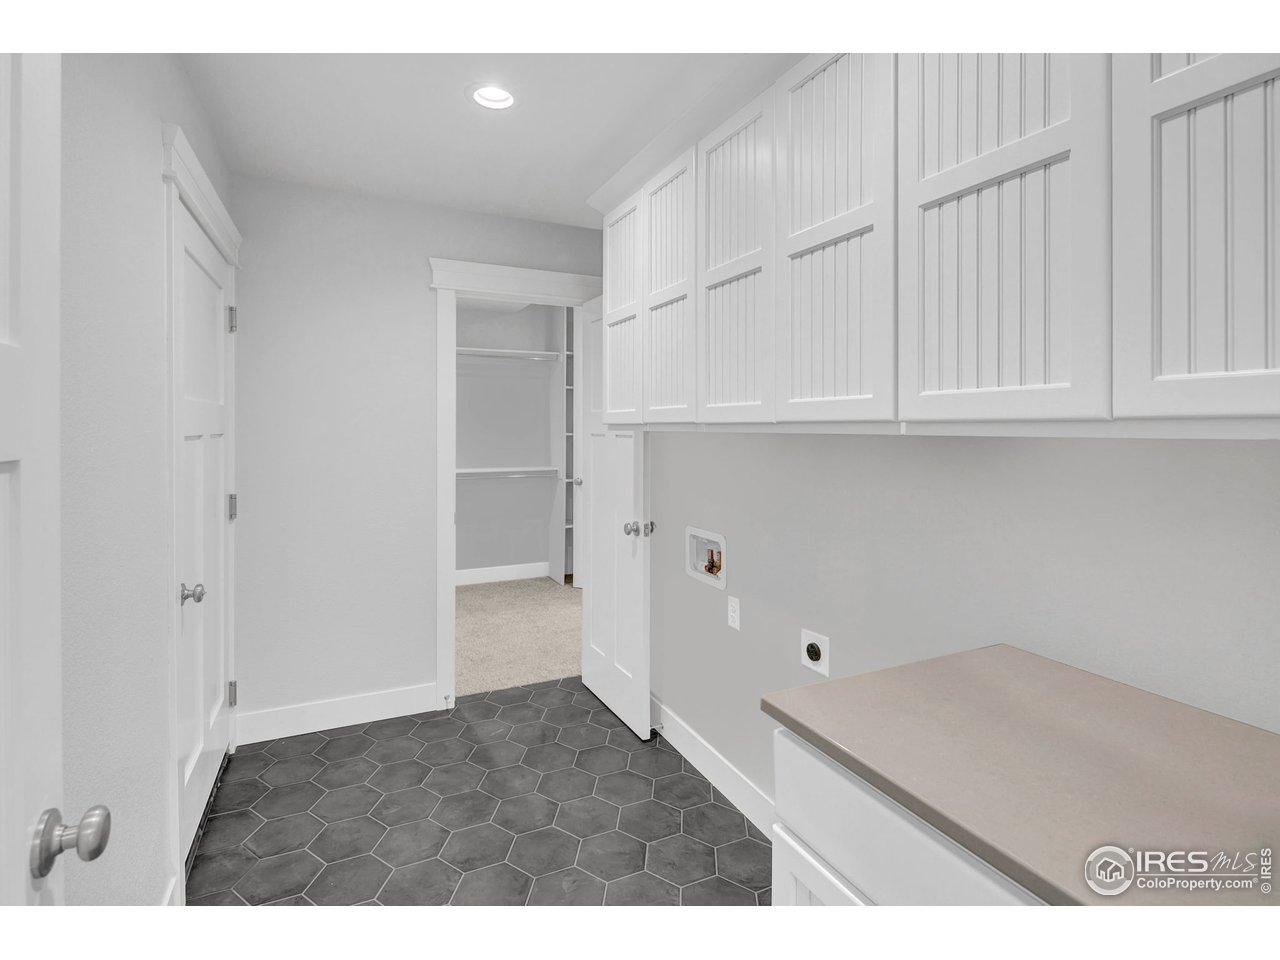 Mudroom/drop zone off the garage and kitchen makes life easier